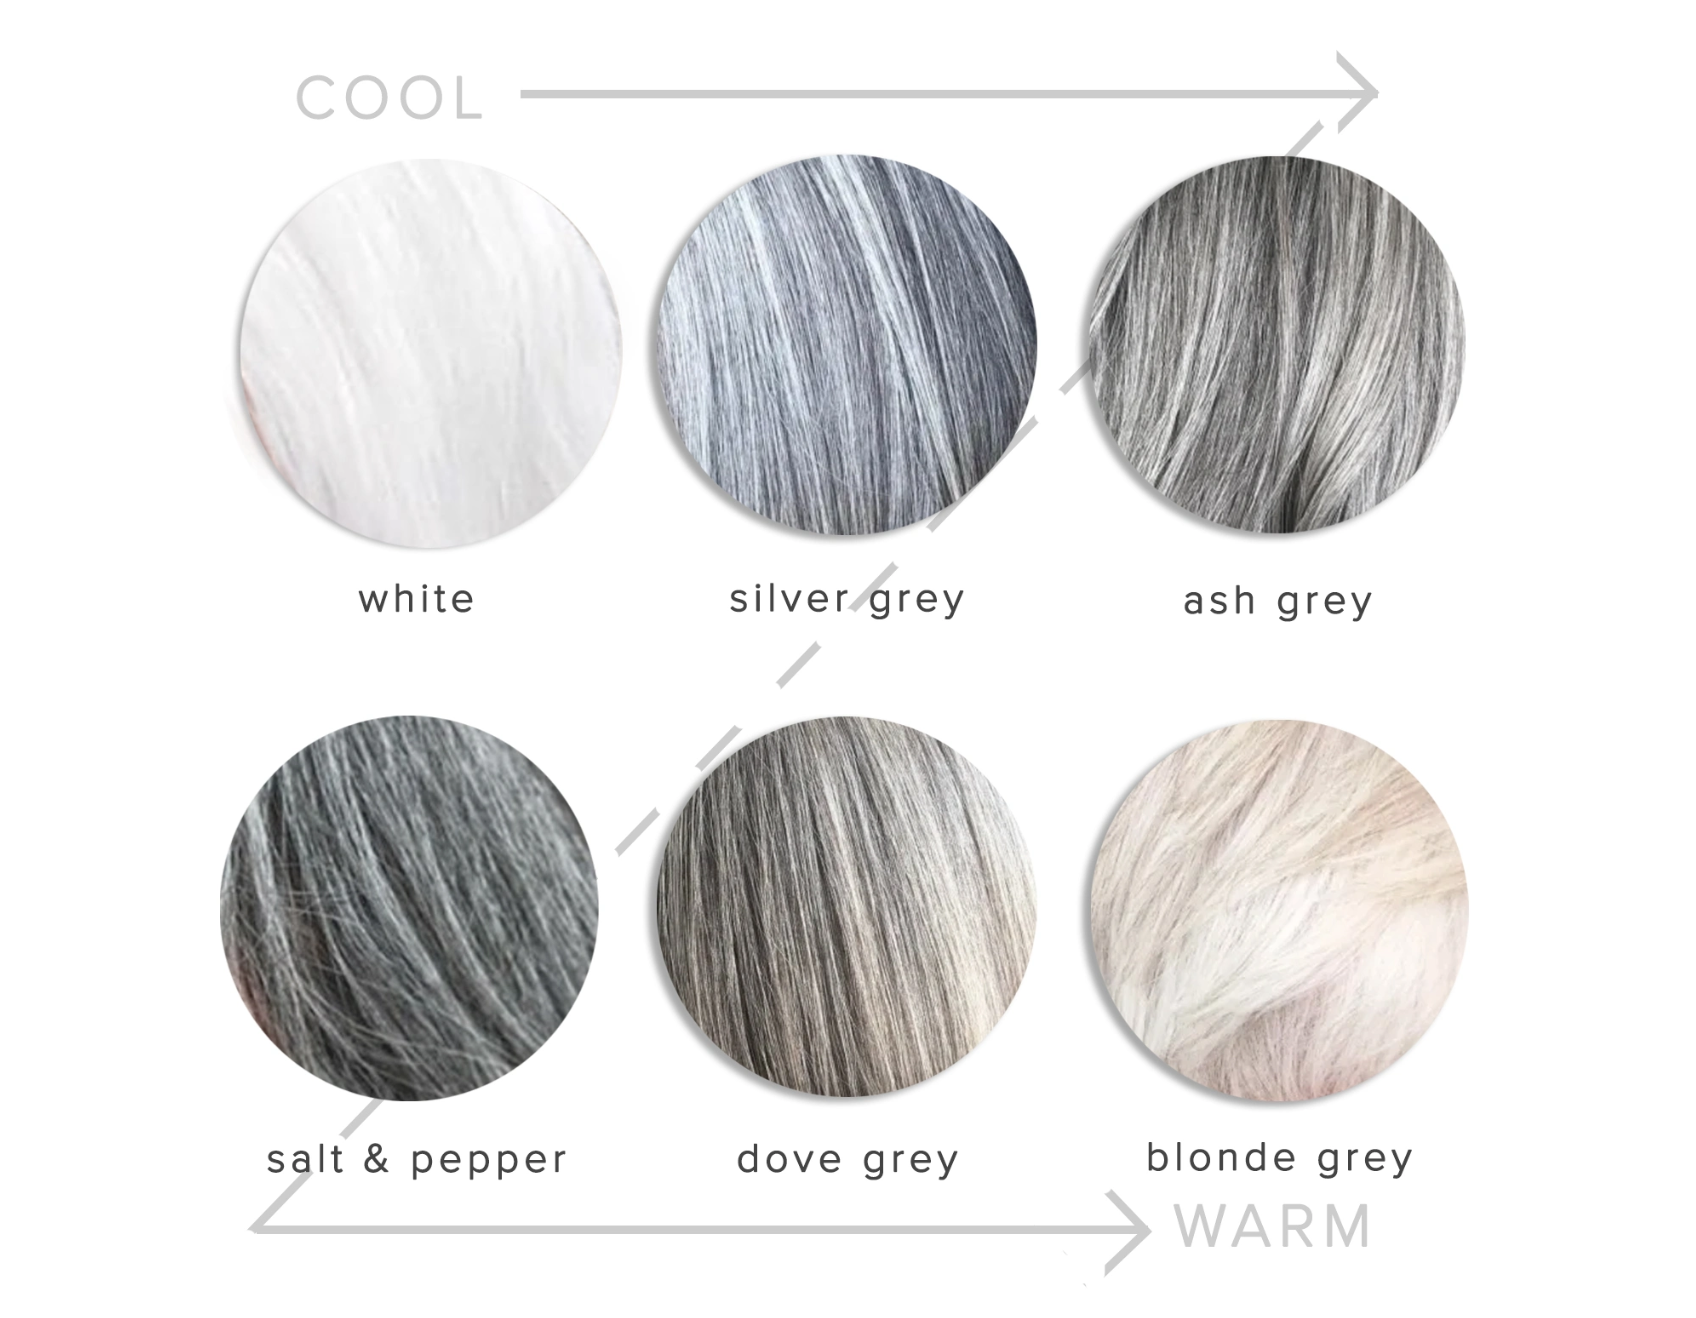 A chart of hair tones ranging from white to blonde grey.